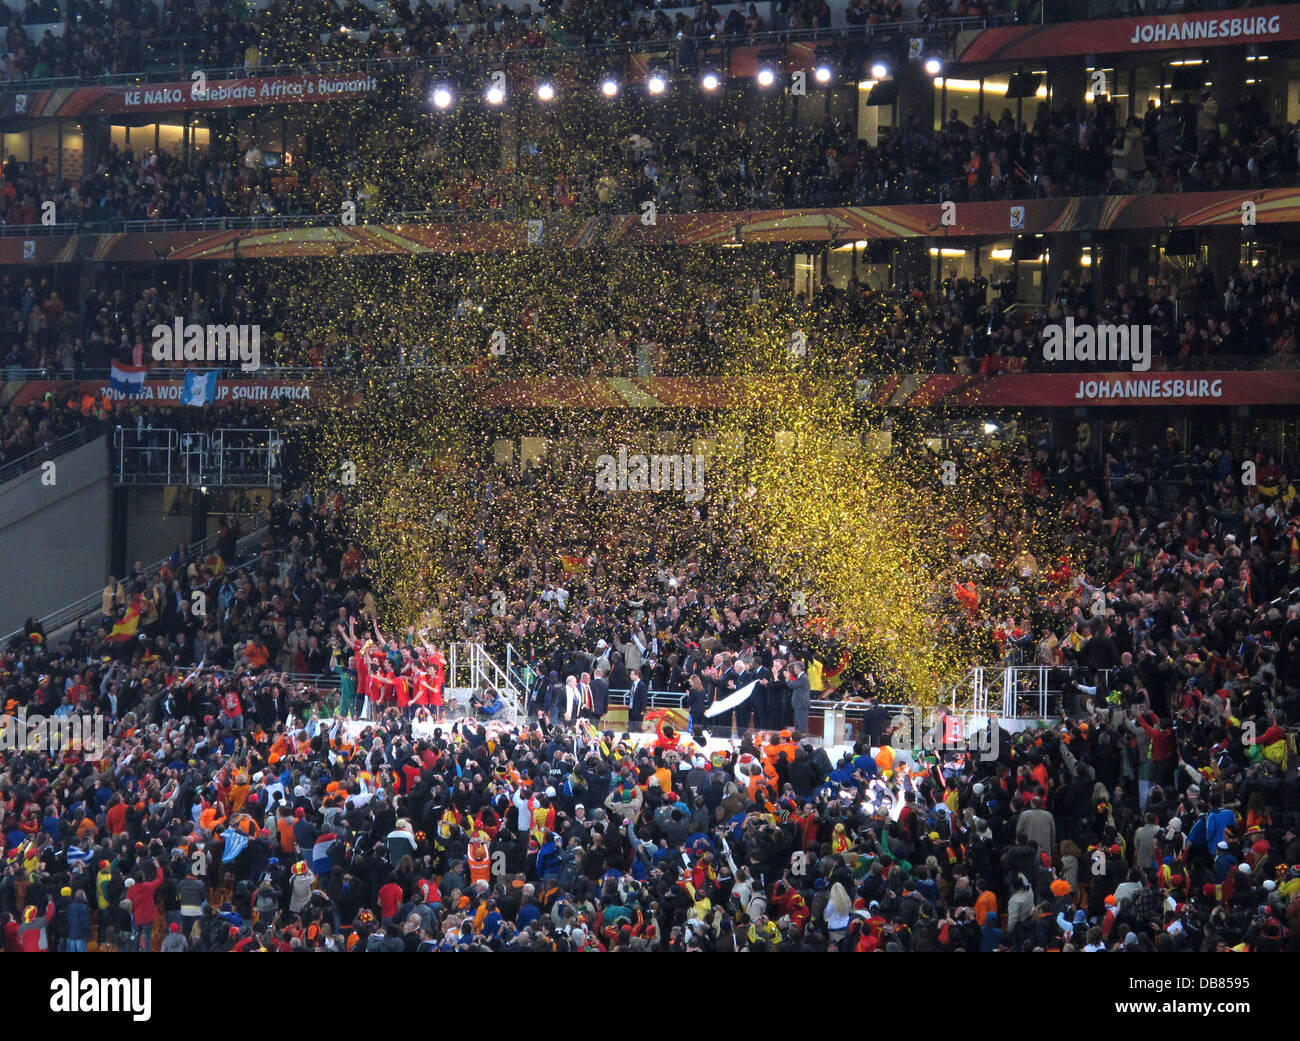 Spain celebrate after winning 2010 soccer world cup final FNB Stadium in Soweto during 2010 FIFA World Cup Soccer in South Stock Photo